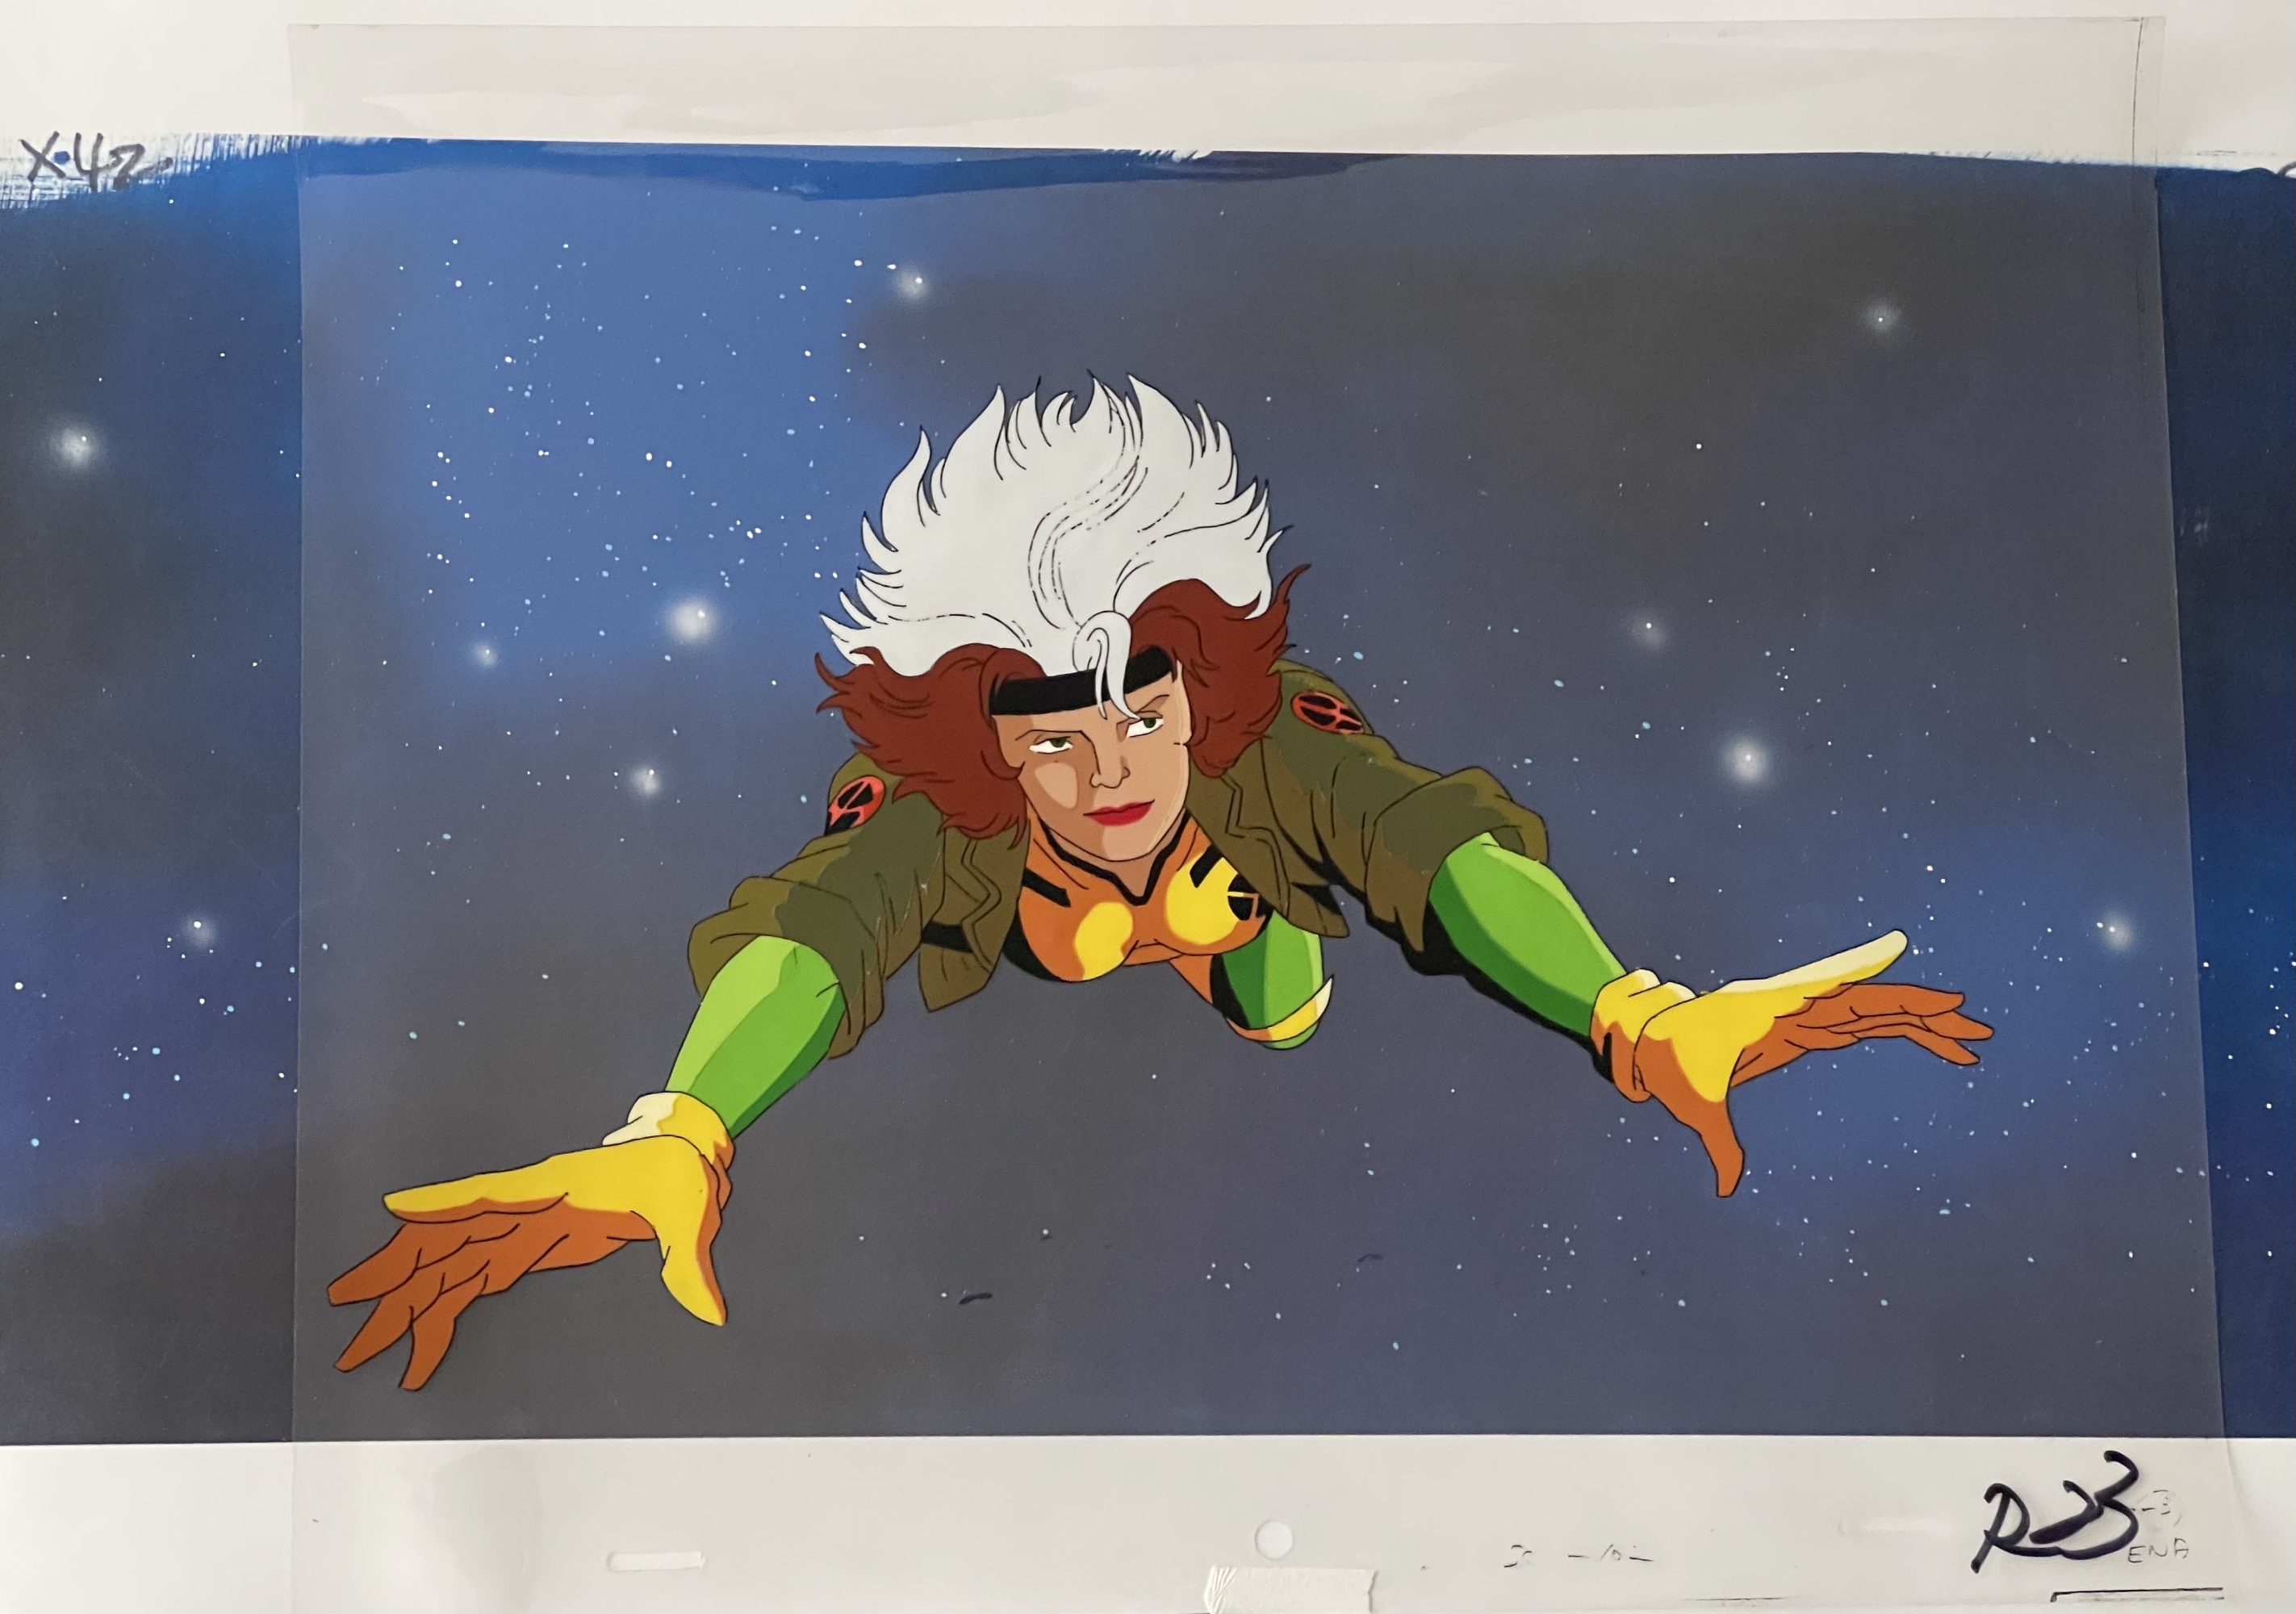 X-Men The Animated Series - Rogue flying animation cel, in James Dornoff's  ---Animation Cel Art Comic Art Gallery Room